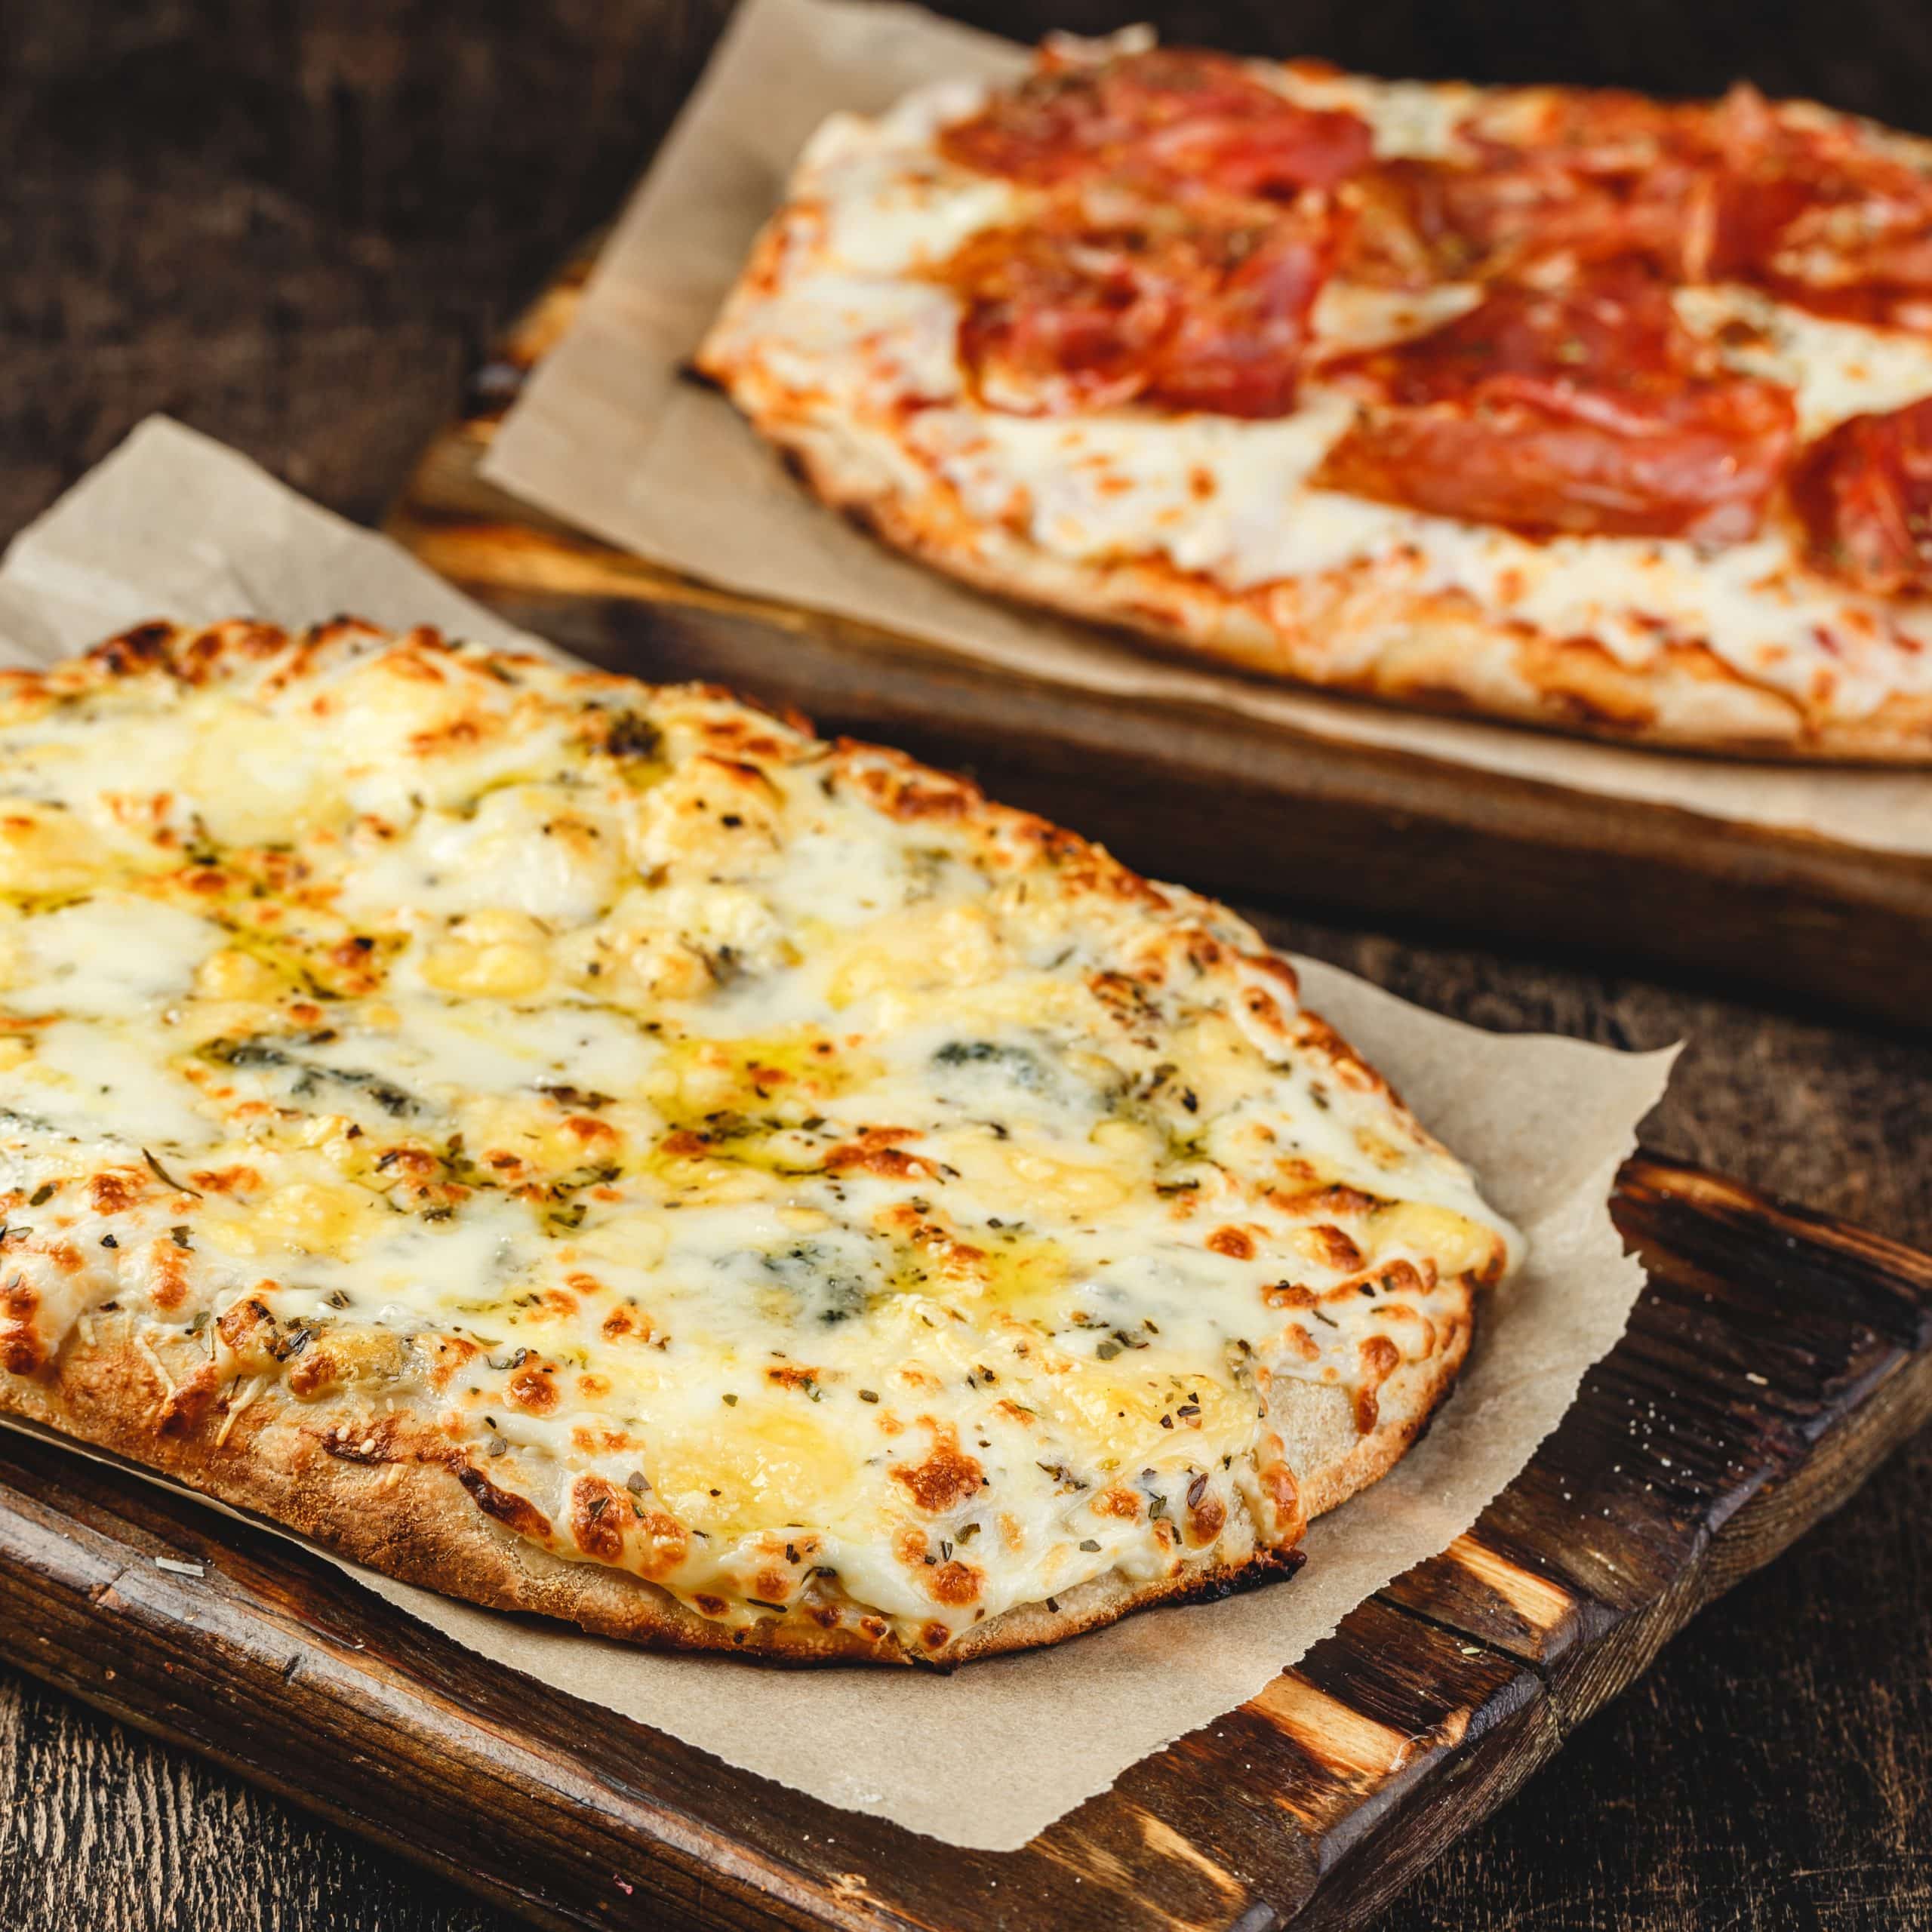 Two Roman-style pizzas with cheese and jamon serrano. Roman square pizza or Pinsa on thick dough, Italian cuisine.